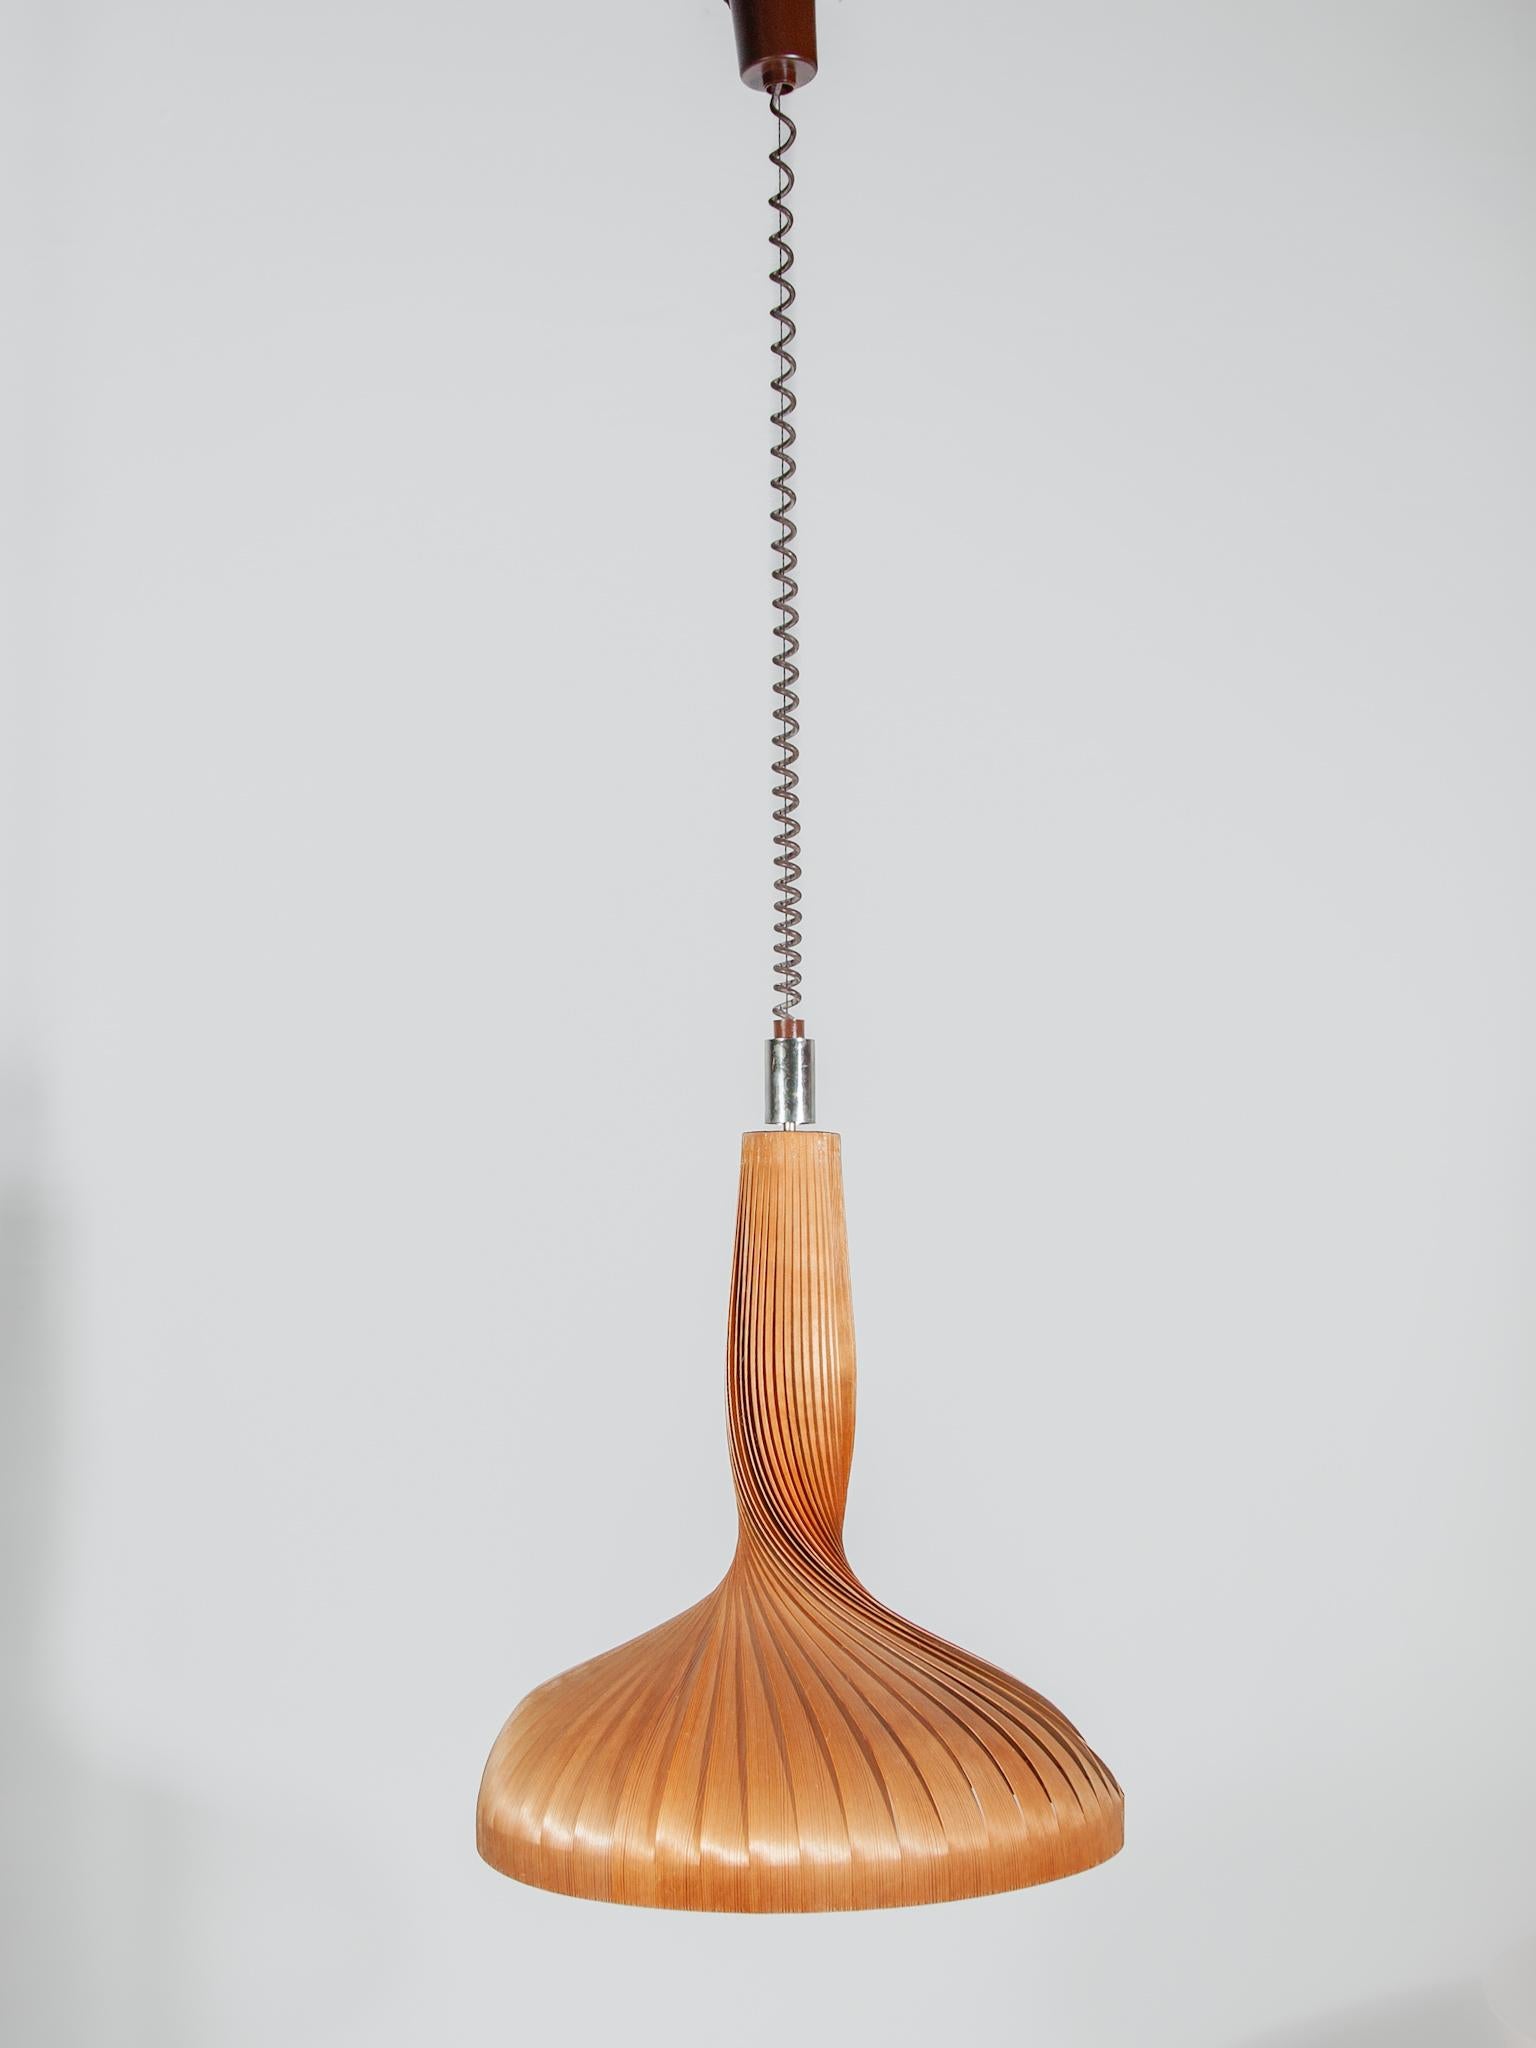 Hand-Crafted Natural Wooden Lamp by Hans-Agne Jakobsson for AB Ellysett Markaryd, Sweden. For Sale